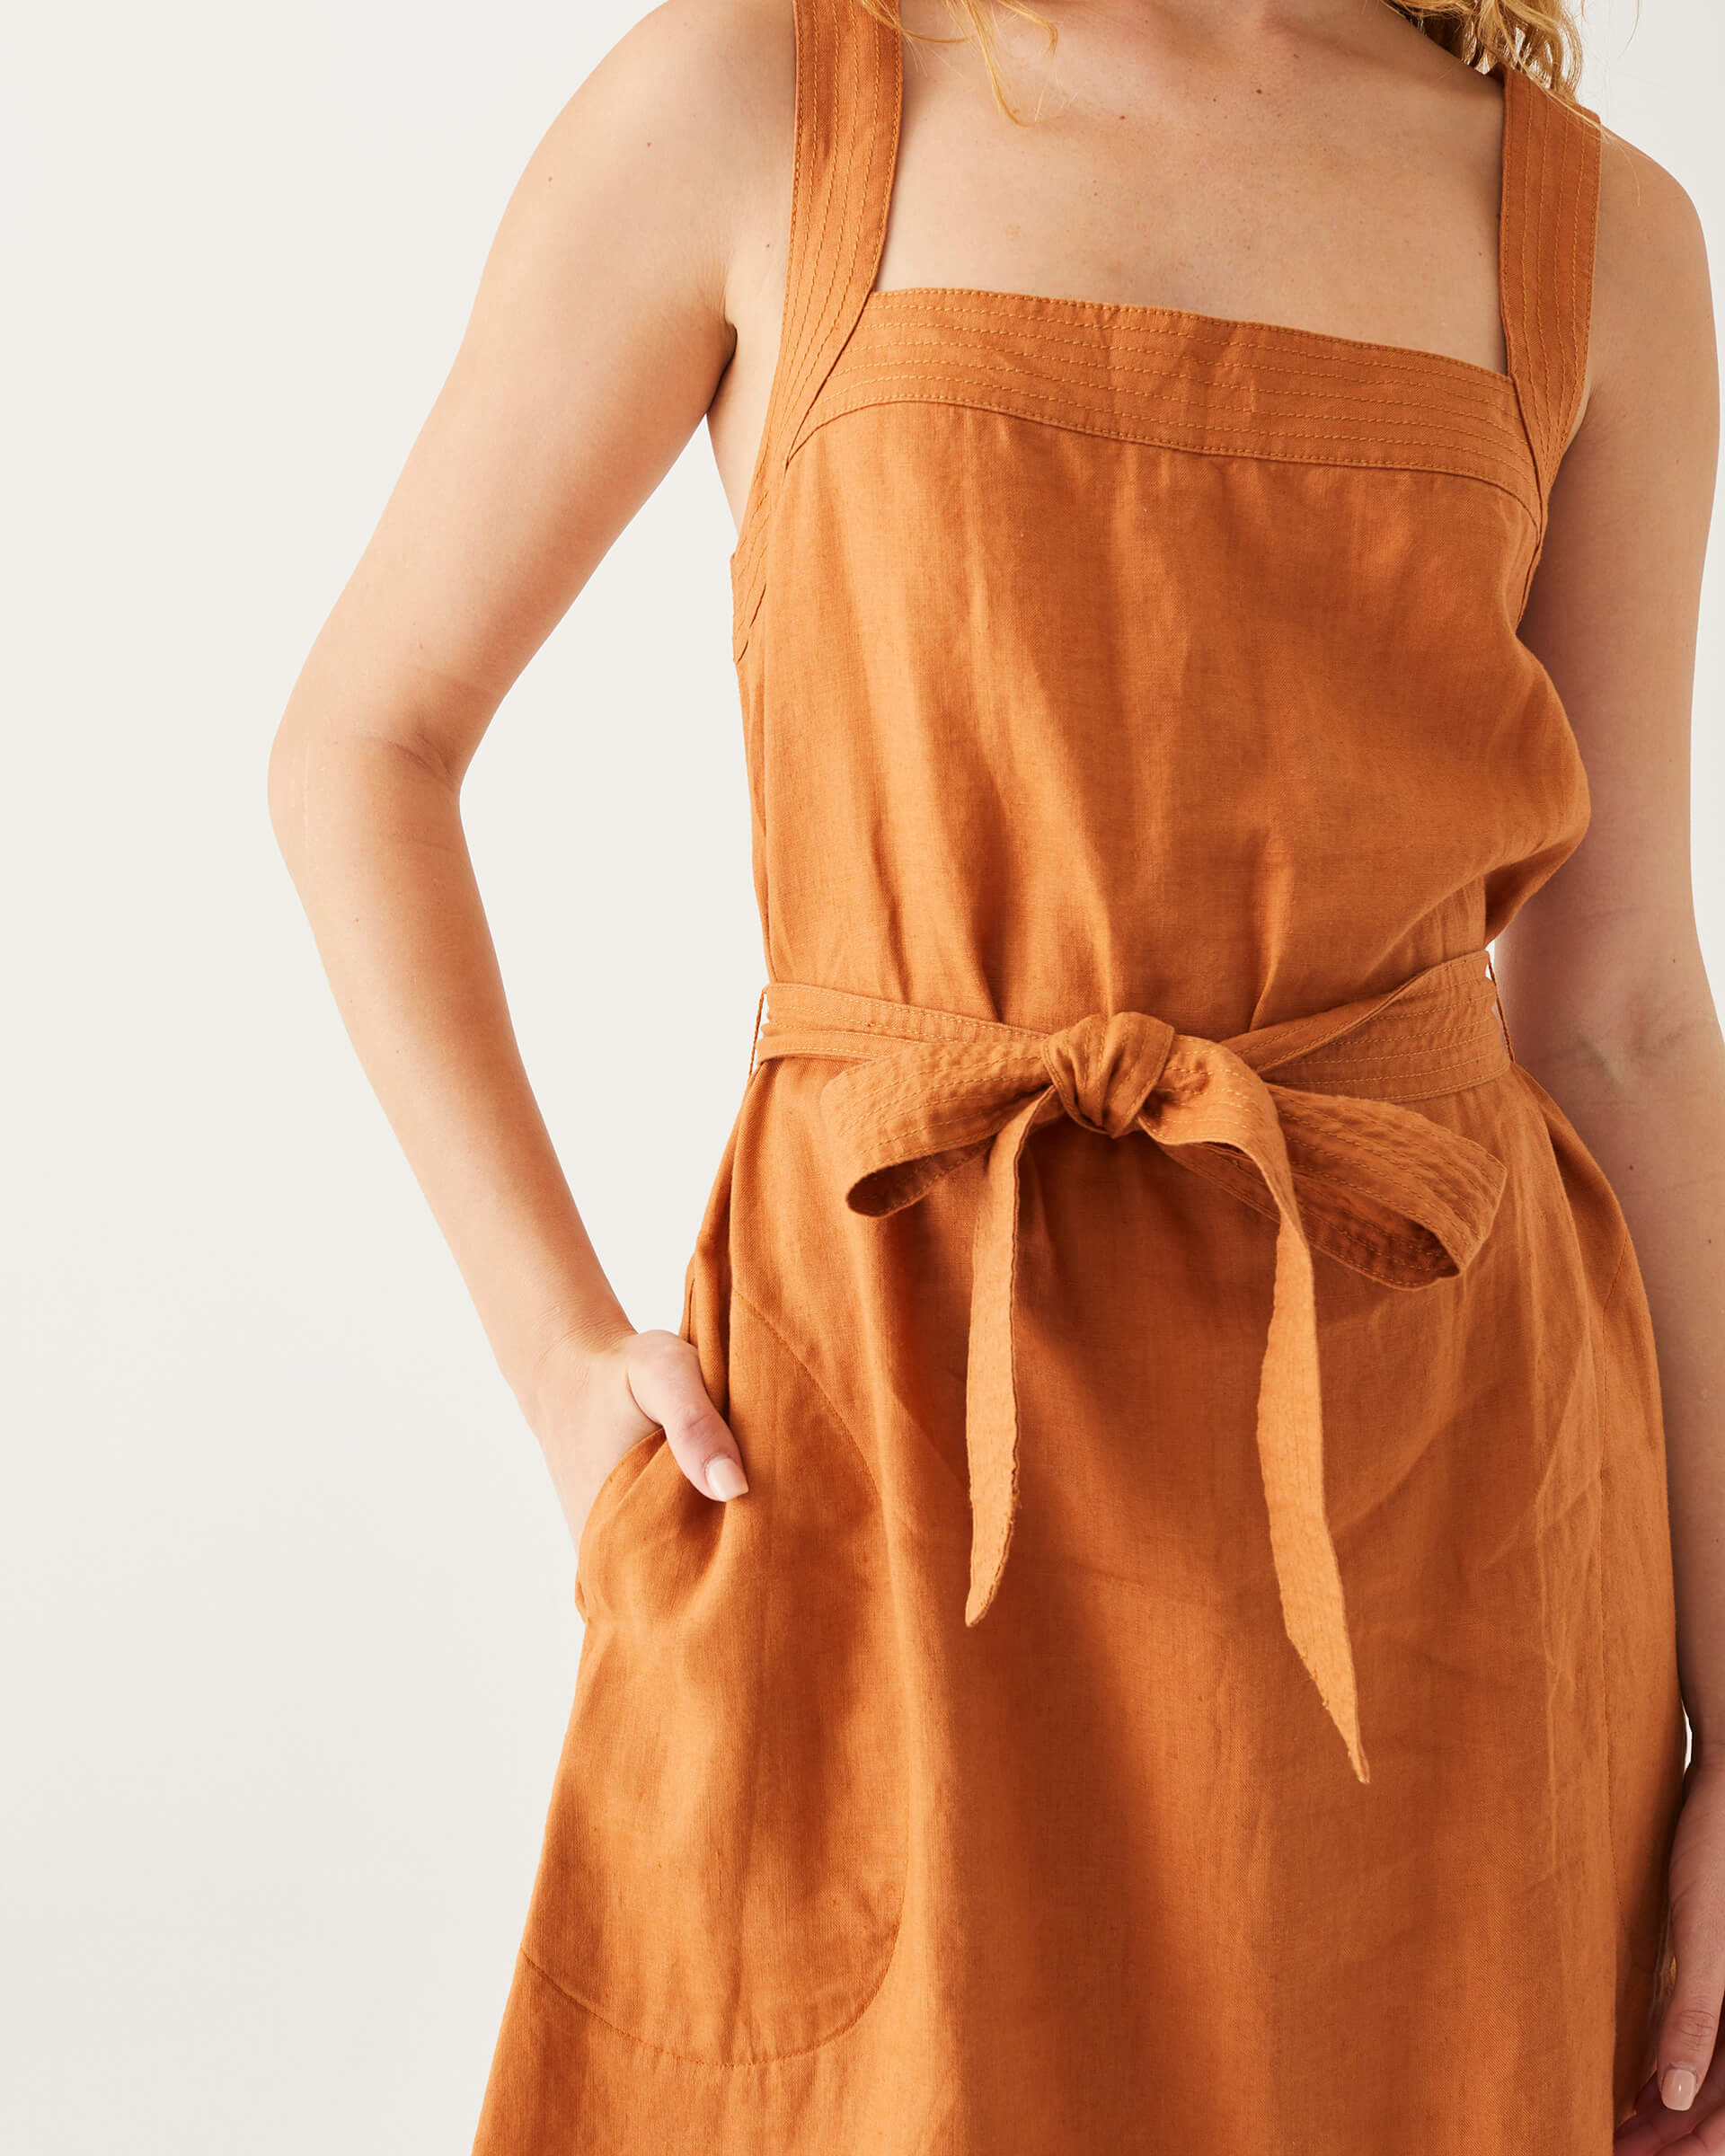 female wearing clay A-line linen sundress with self-belt standing on a white background